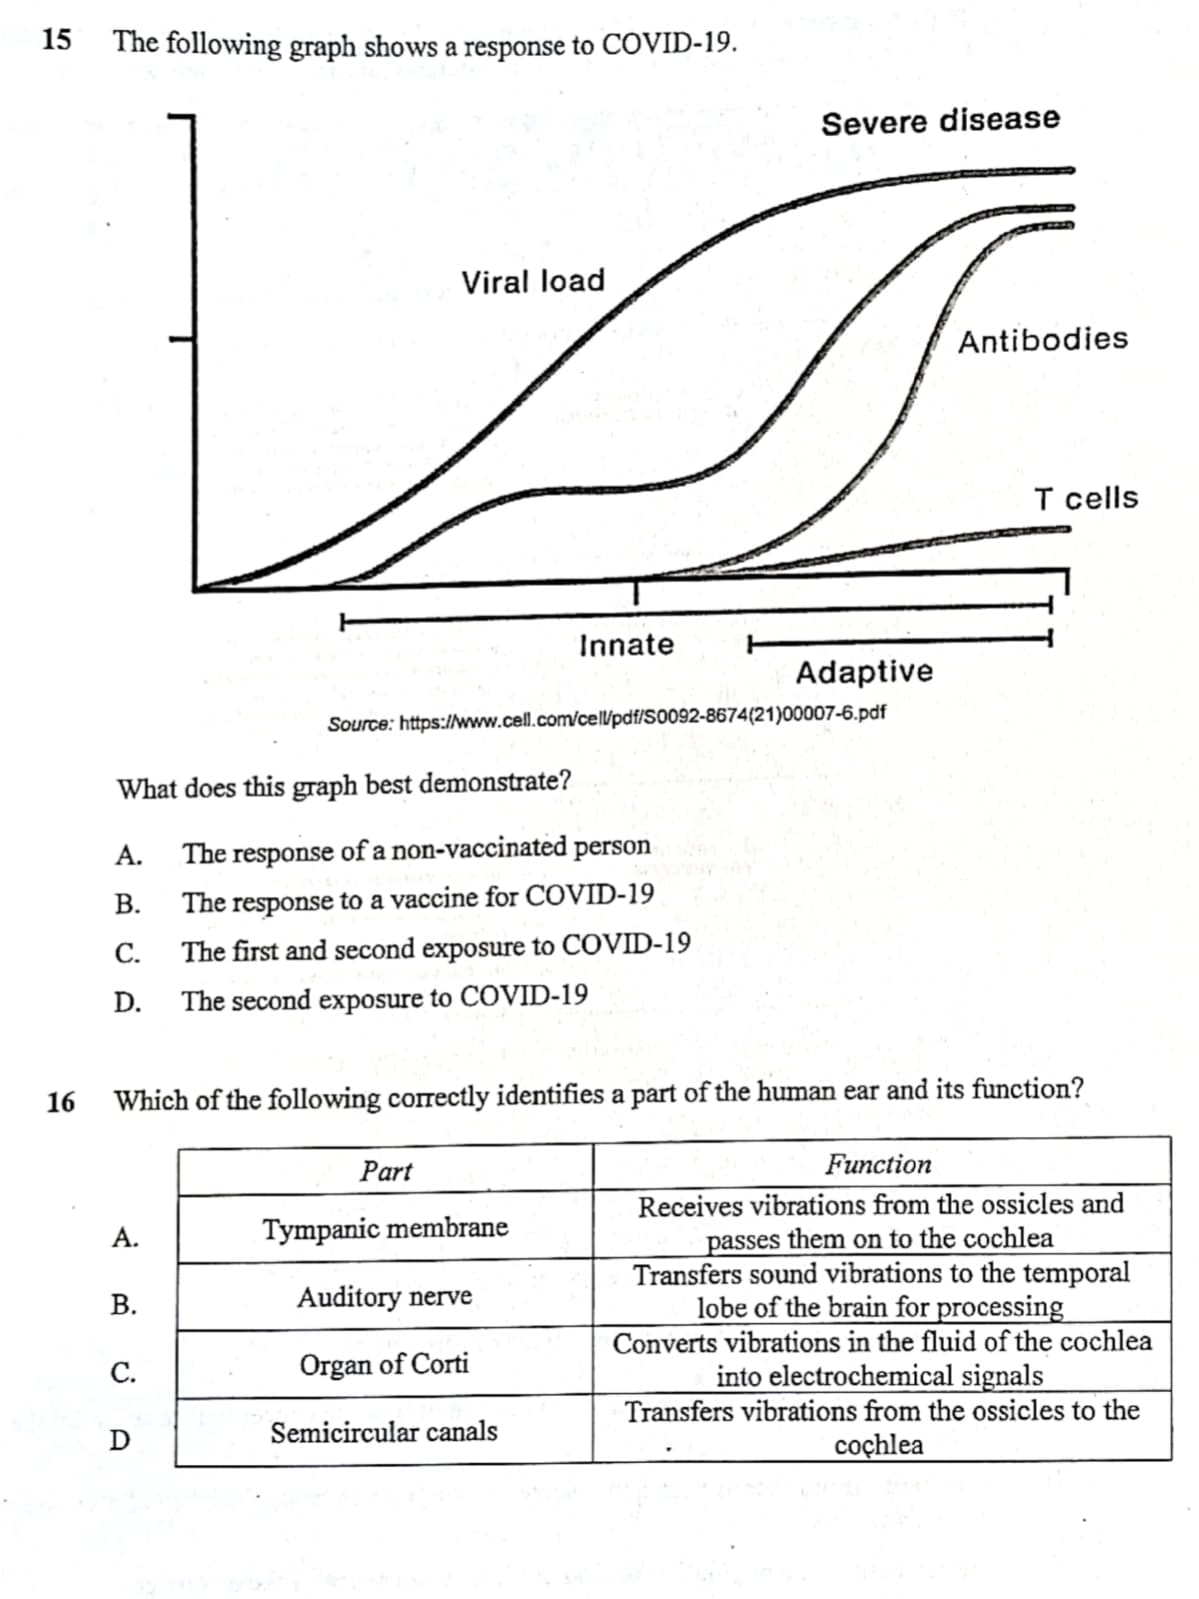 15
16
The following graph shows a response to COVID-19.
Source:
What does this graph best demonstrate?
A.
B.
C.
D.
A.
B.
C.
Viral load
D
Innate
https://www.cell.com/cell/pdf/S0092-8674(21)00007-6.pdf
The response of a non-vaccinated person
The response to a vaccine for COVID-19
The first and second exposure to COVID-19
The second exposure to COVID-19
Part
Which of the following correctly identifies a part of the human ear and its function?
Severe disease
Tympanic membrane
Auditory nerve
Organ of Corti
Semicircular canals
Adaptive
Antibodies
T cells
Function
Receives vibrations from the ossicles and
passes them on to the cochlea
Transfers sound vibrations to the temporal
lobe of the brain for processing
Converts vibrations in the fluid of the cochlea
into electrochemical signals
Transfers vibrations from the ossicles to the
cochlea